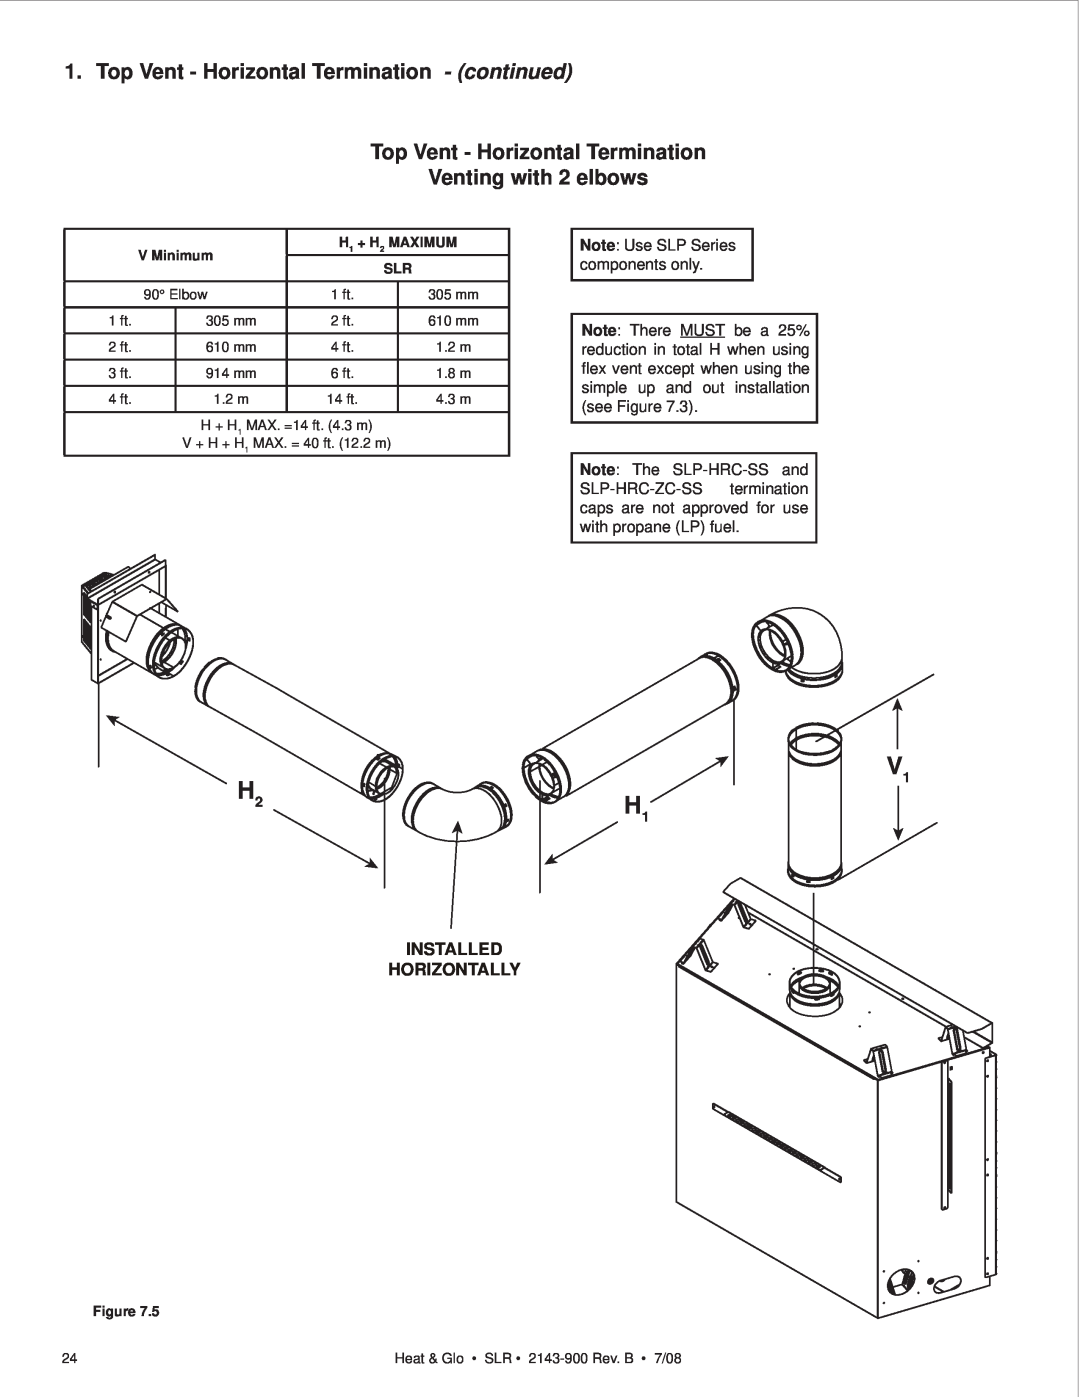 Heat & Glo LifeStyle SLR (COSMO) owner manual Top Vent - Horizontal Termination - continued, Venting with 2 elbows 